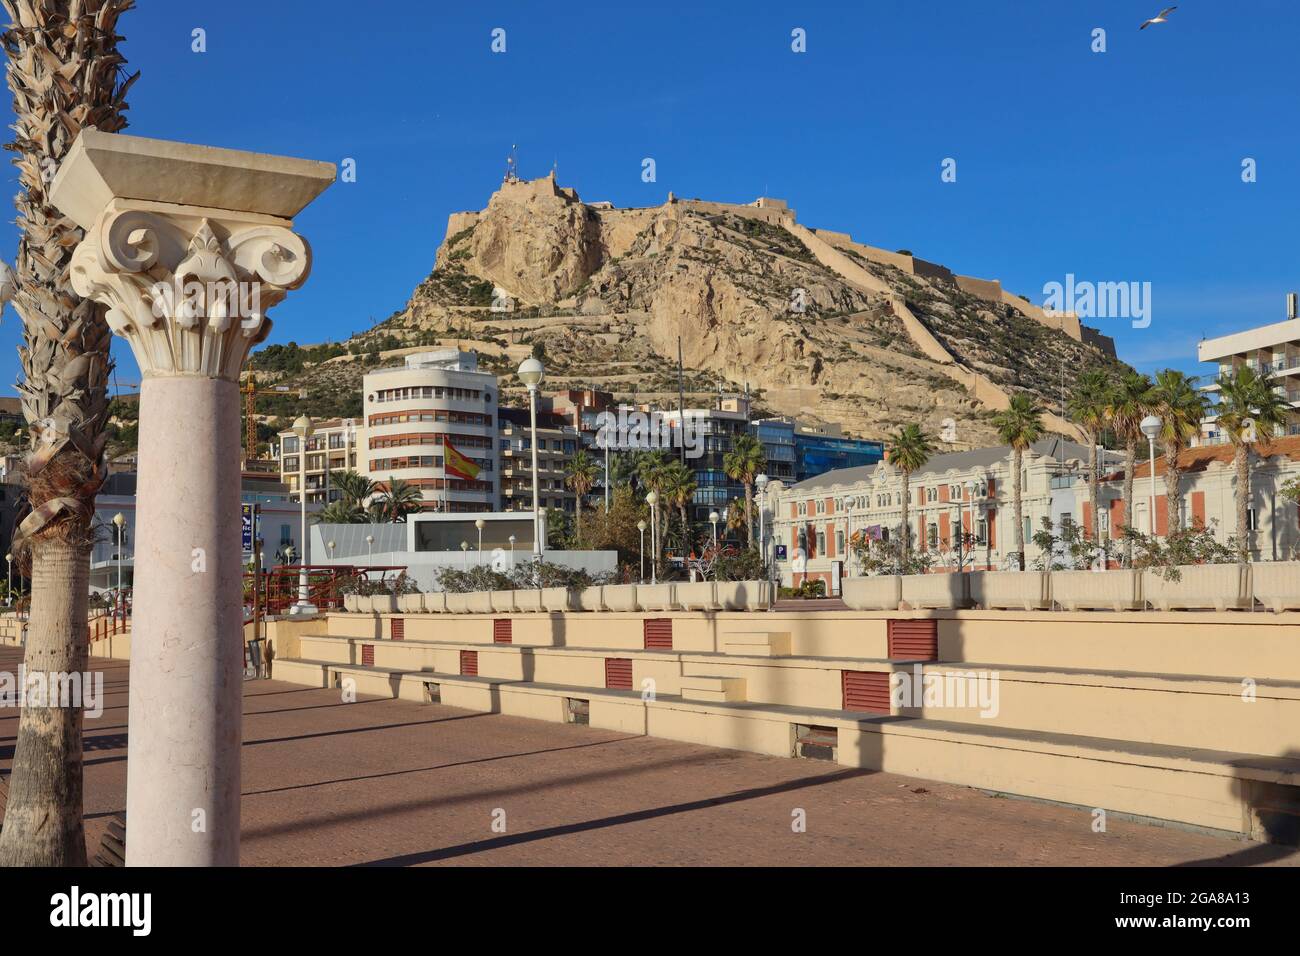 The castle of Santa Barbara high up on a promontory overlooking the city of Alicante, Spain with the esplanade in the foreground Stock Photo